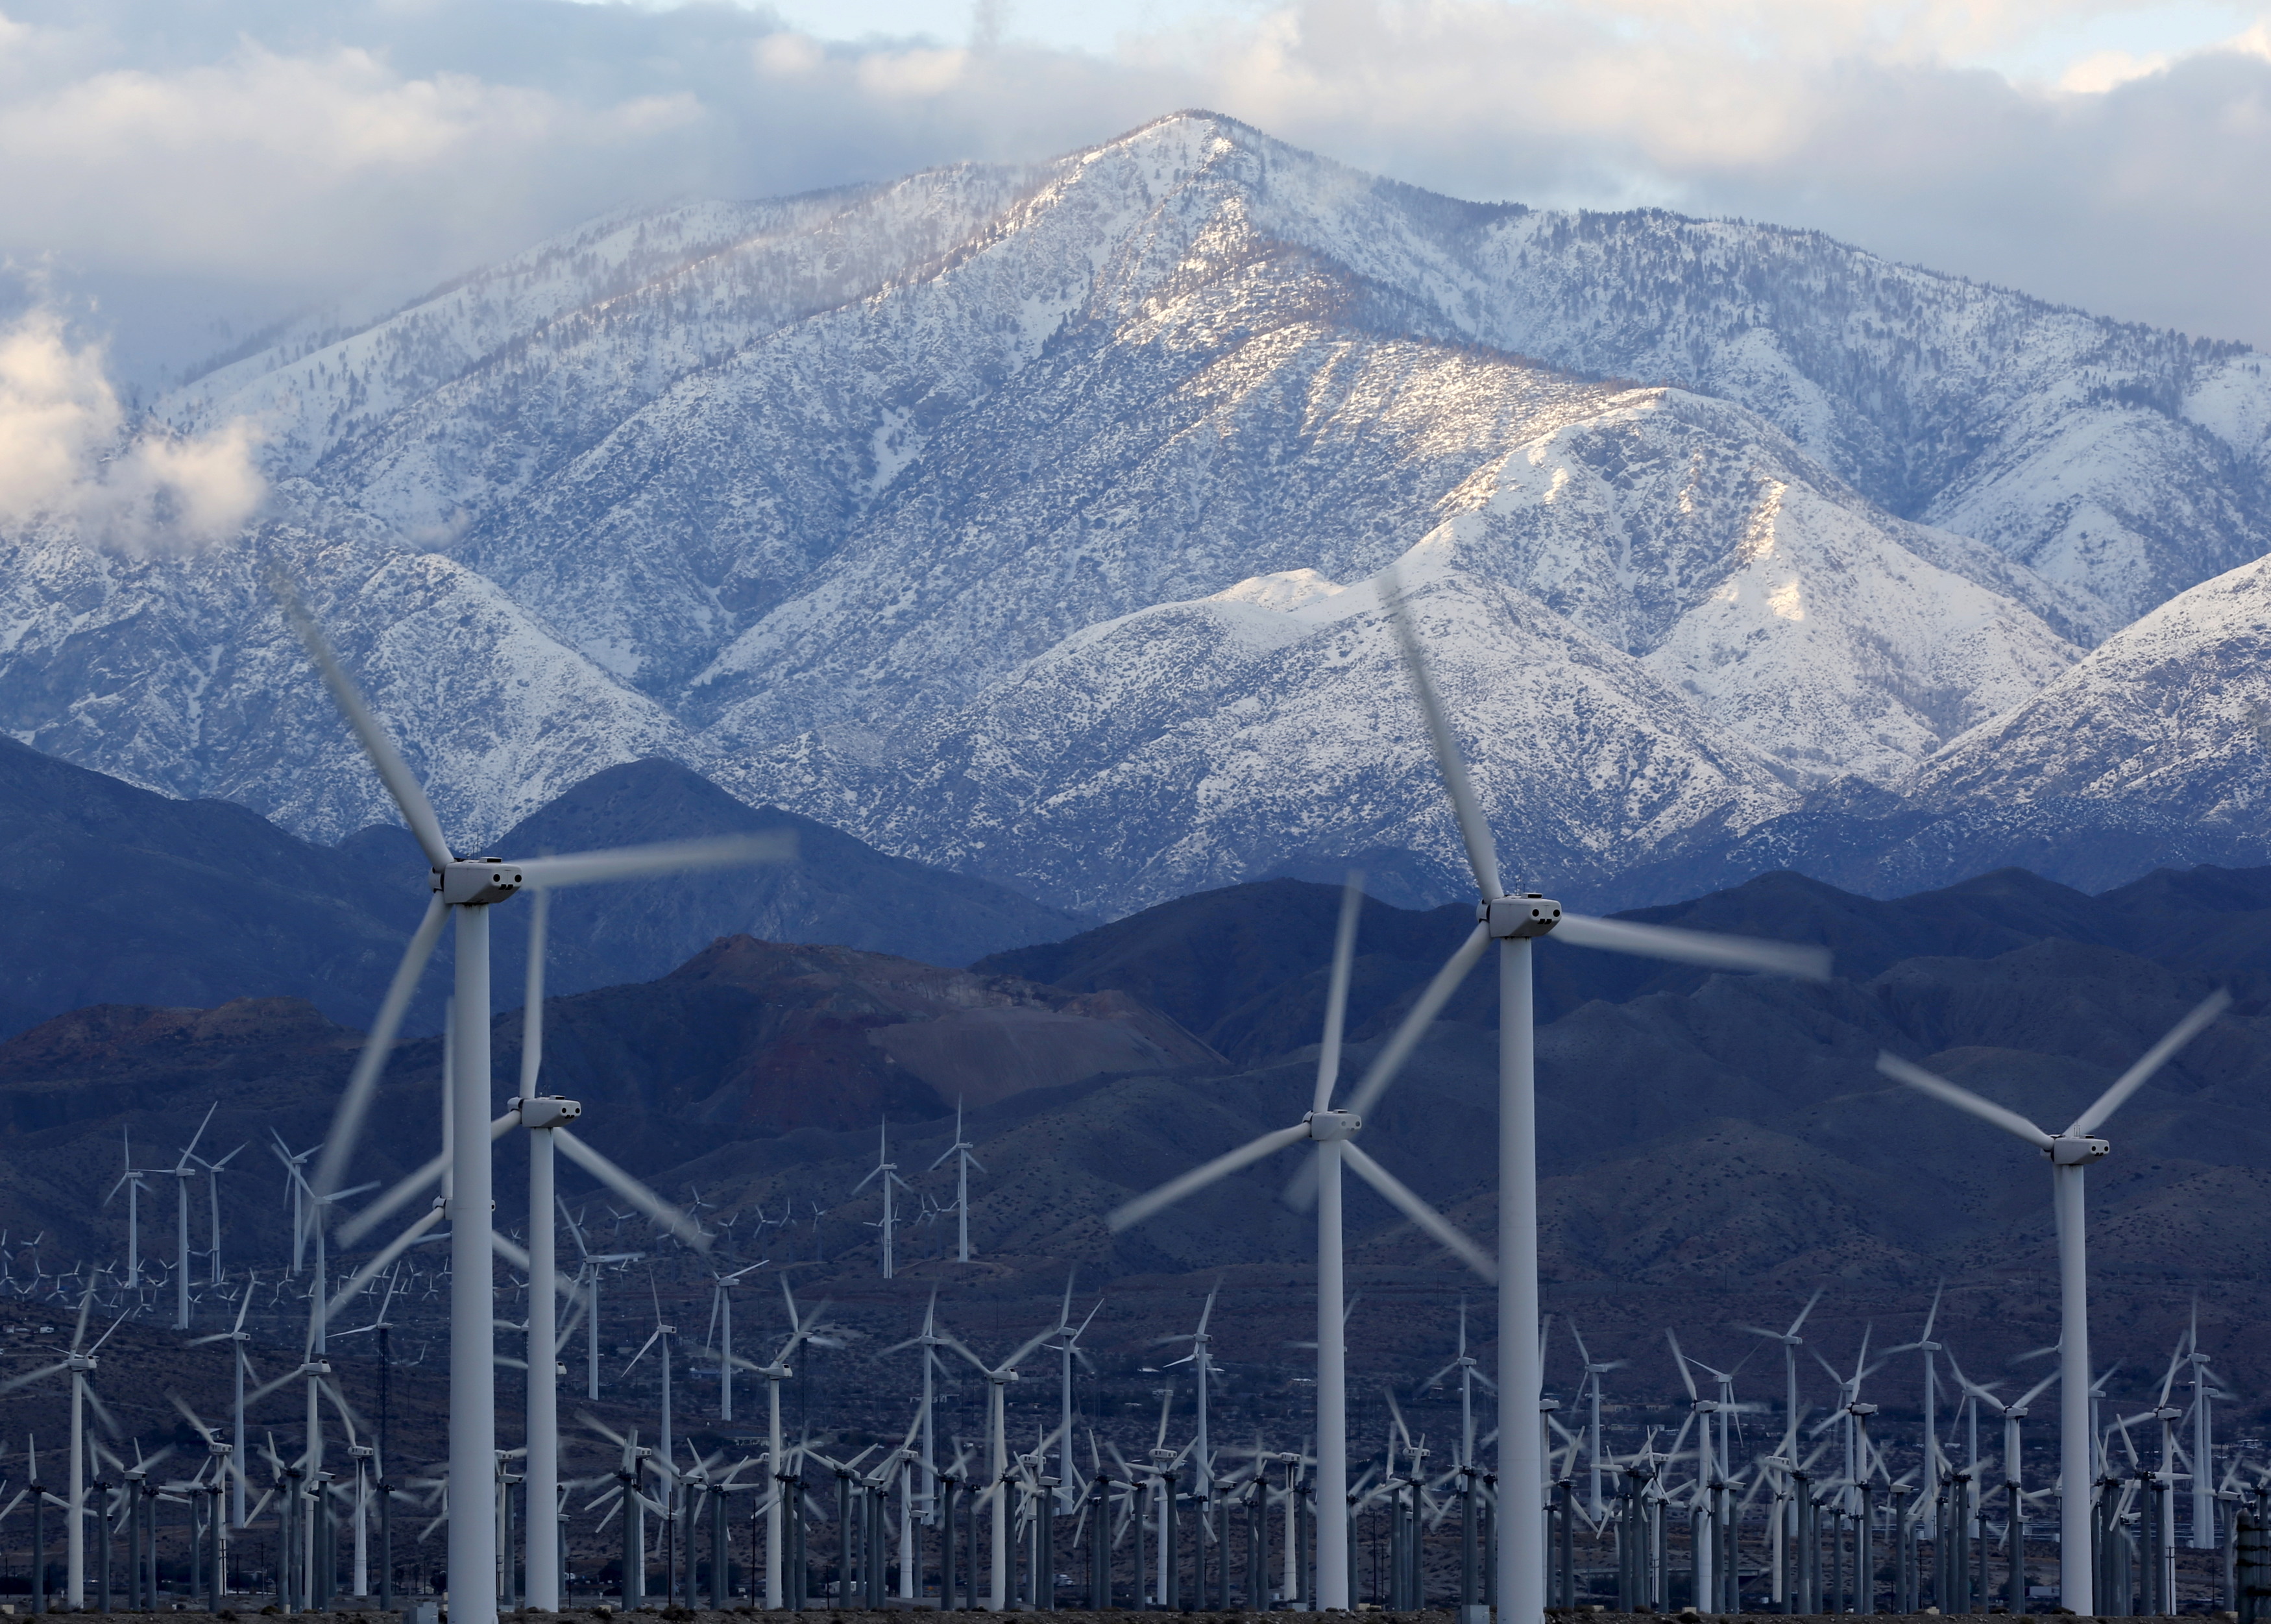 Snow is seen on the San Gorgonio Mountains behind a windmill farm in Palm Springs